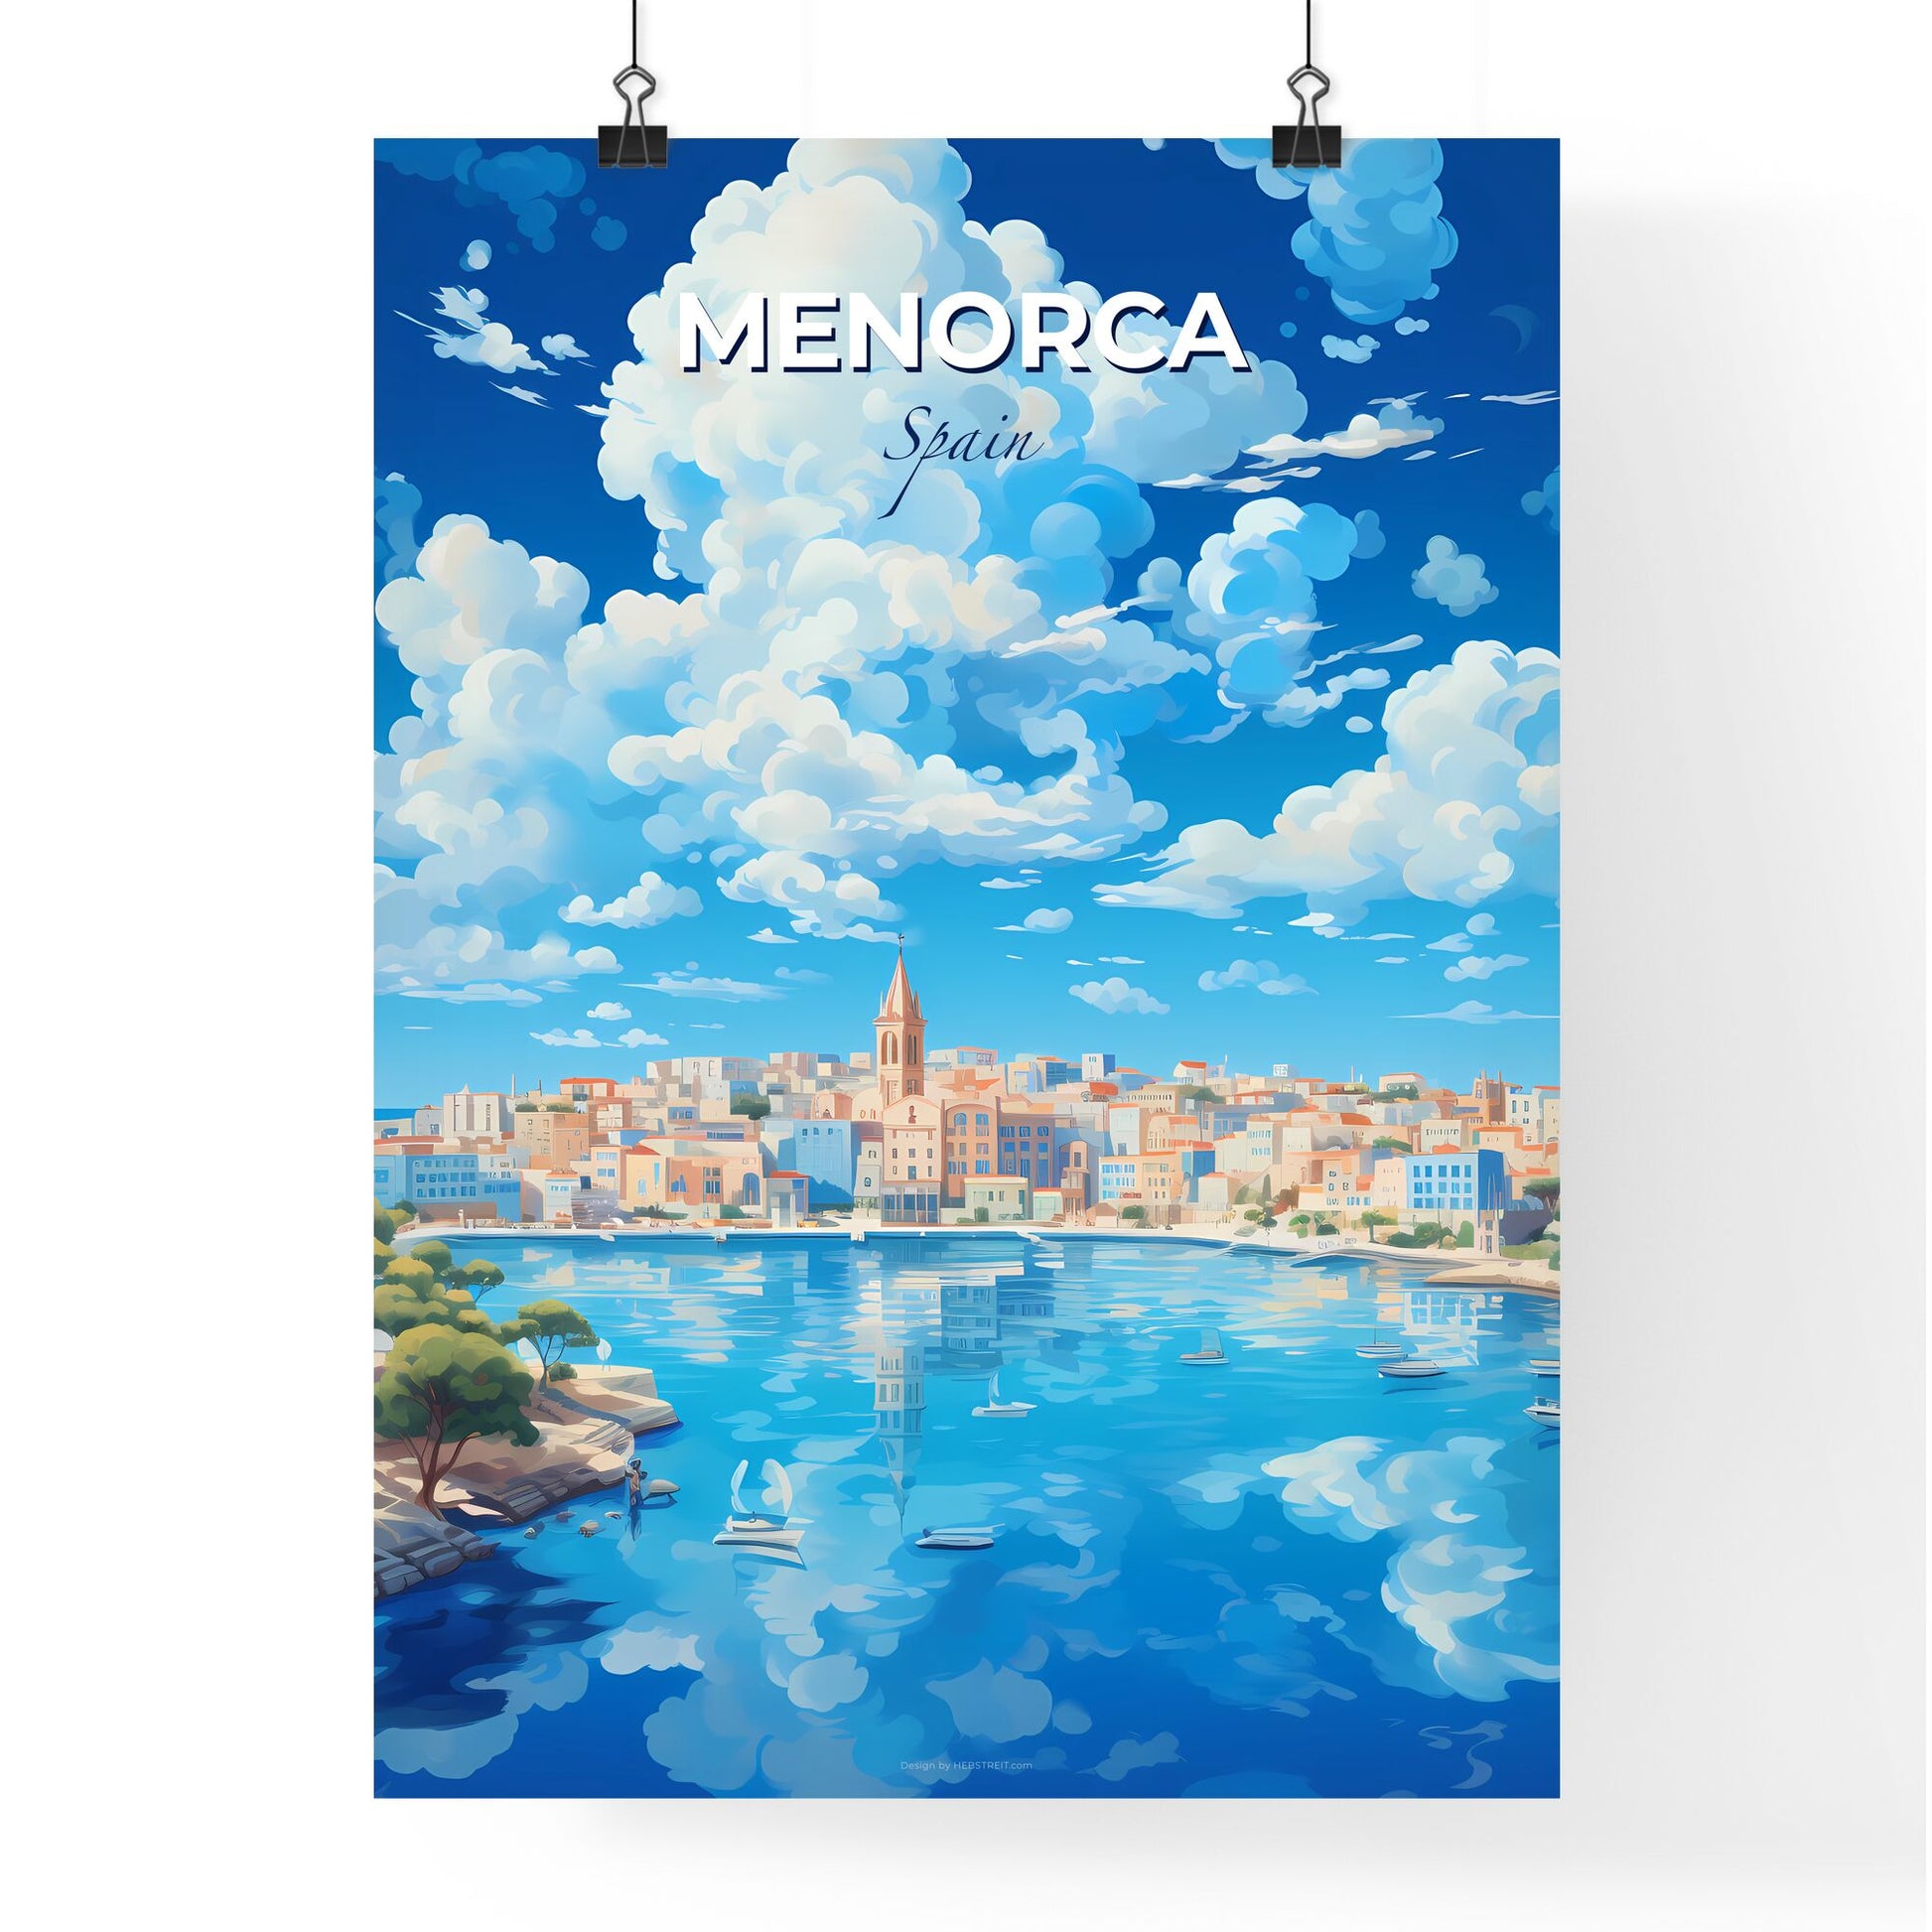 Menorca Spain Skyline - A Water Body With Boats And Buildings In The Background - Customizable Travel Gift Default Title